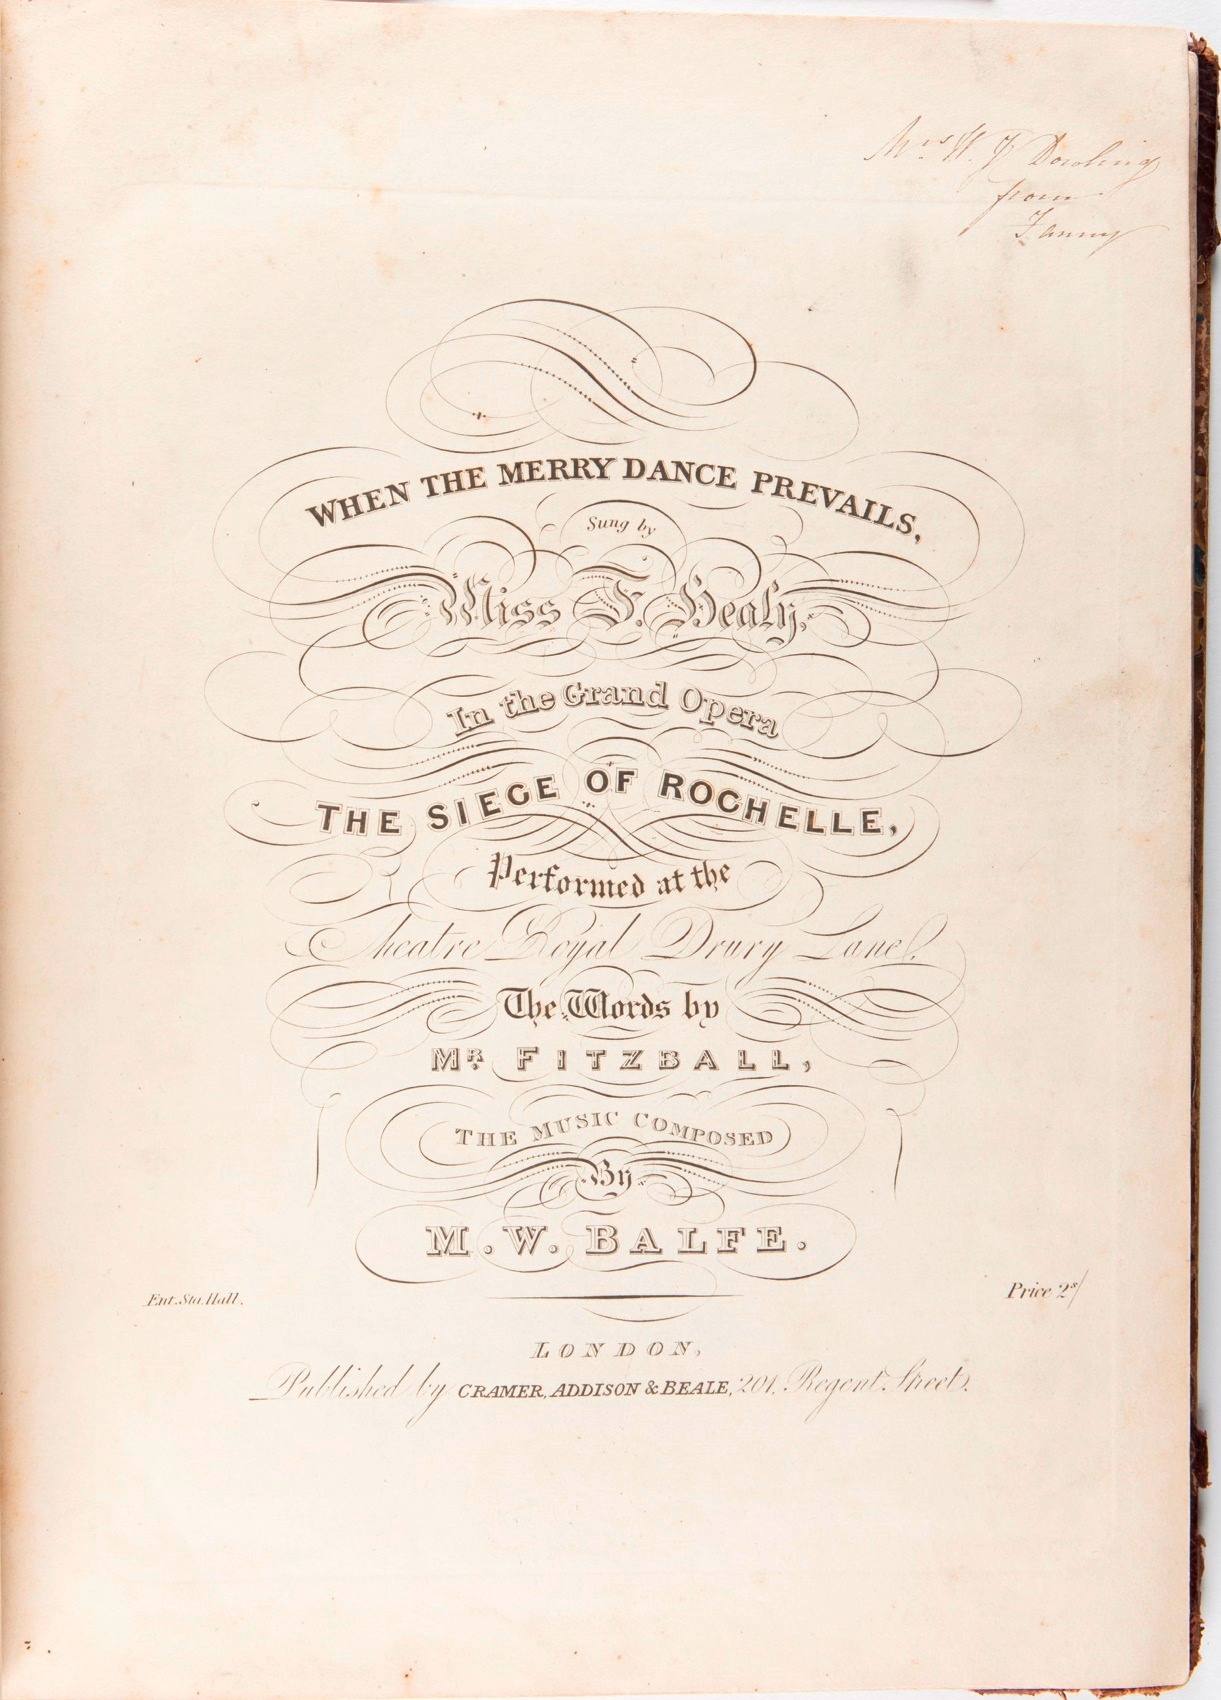 Lilias Dowling’s copy of ‘When the Merry Dance Prevails’ by M.W. Balfe (1835)